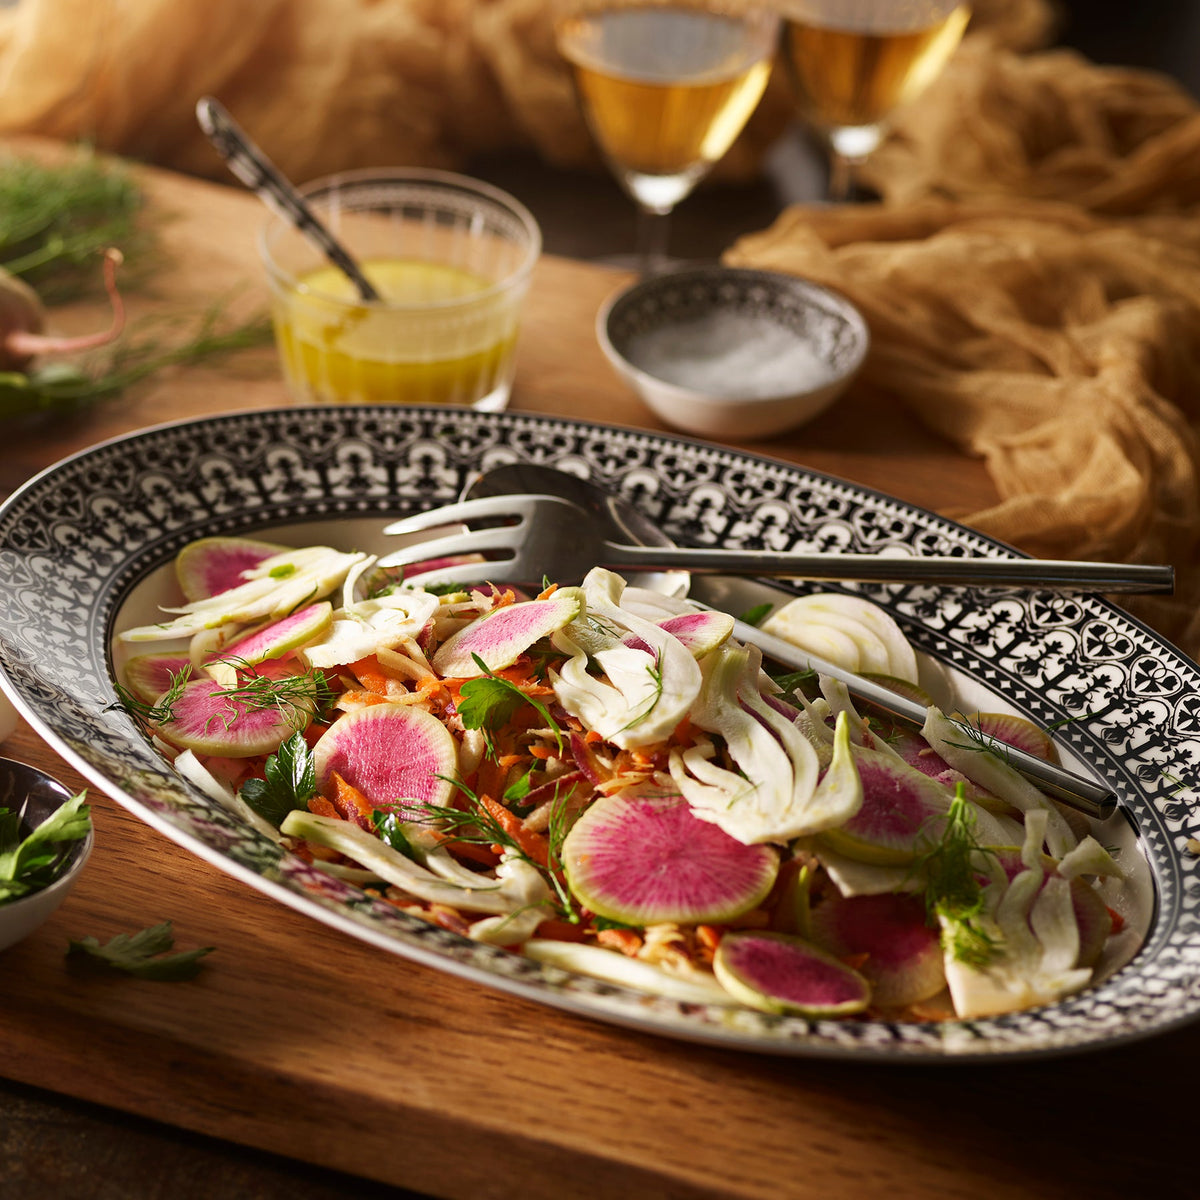 A Caskata Artisanal Home Casablanca Oval Rimmed Platter adorned with ornate scrollwork holds a fresh salad with sliced radishes, fennel, and herbs. A fork rests on the dish. Bowls of dressing and salt, along with two glasses of white wine, are in the background.